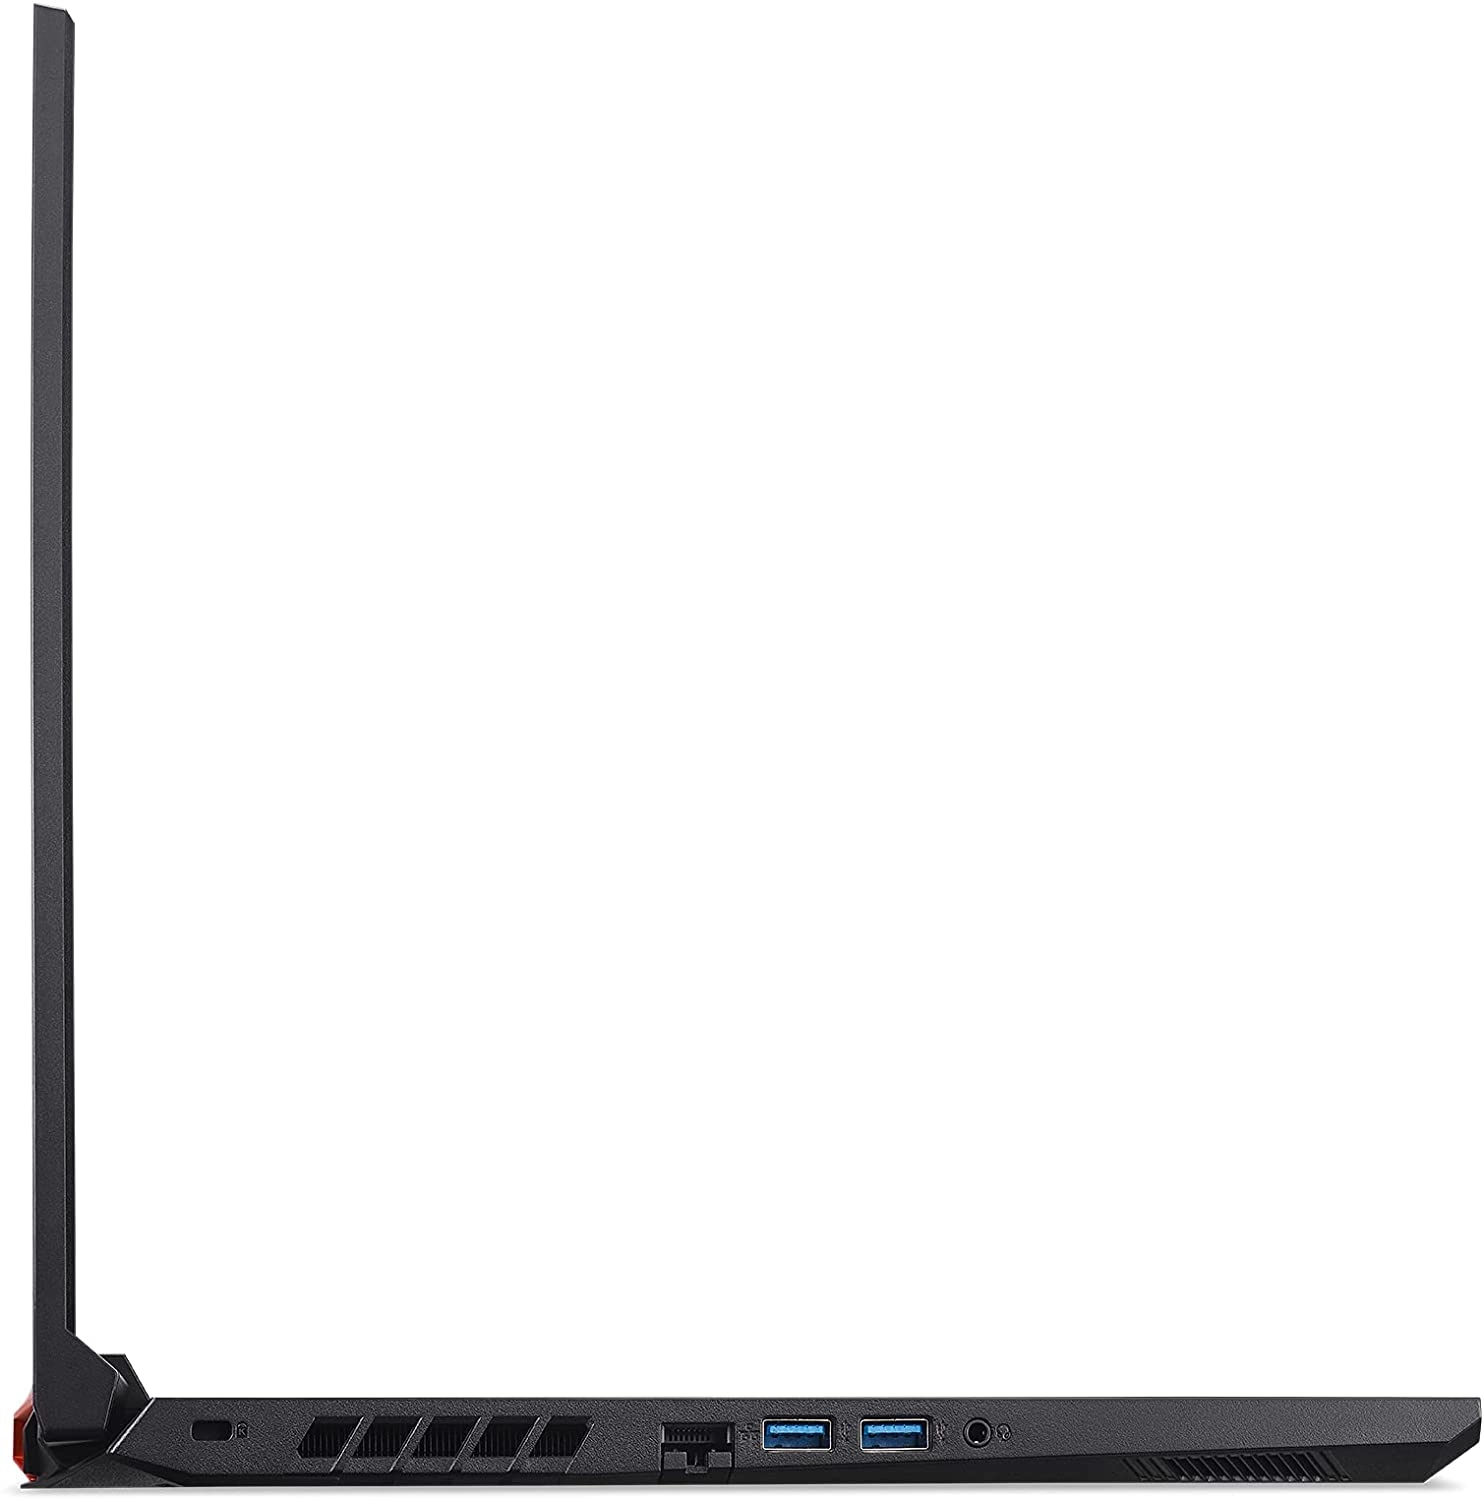 Acer AN517-41-R7EY laptop image